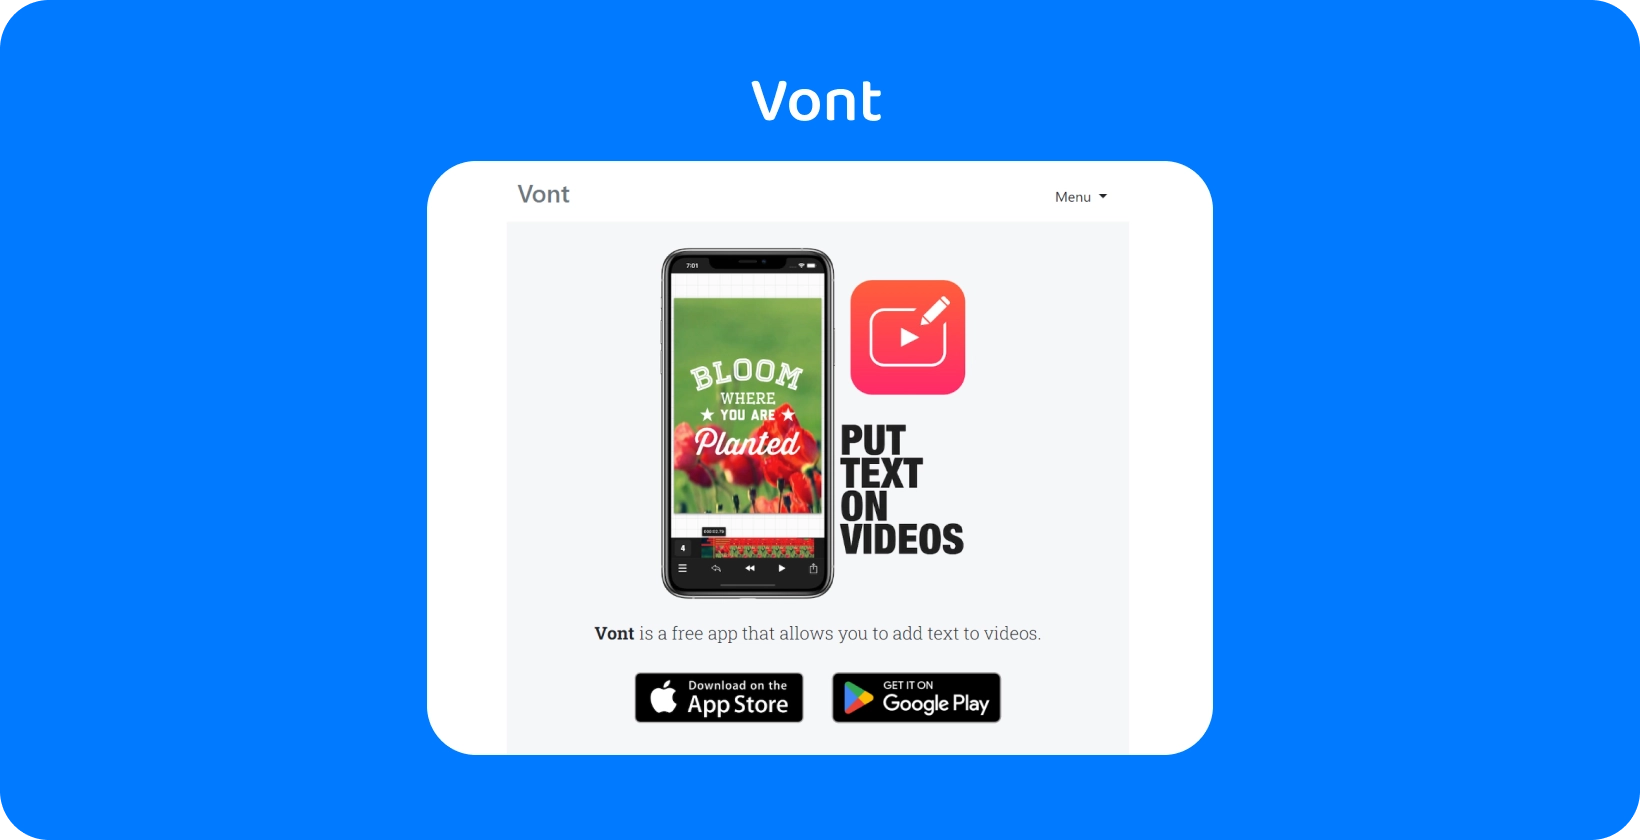 Smartphone displaying Vont app interface, highlighting its feature to add text on videos, available on App Store and Google Play